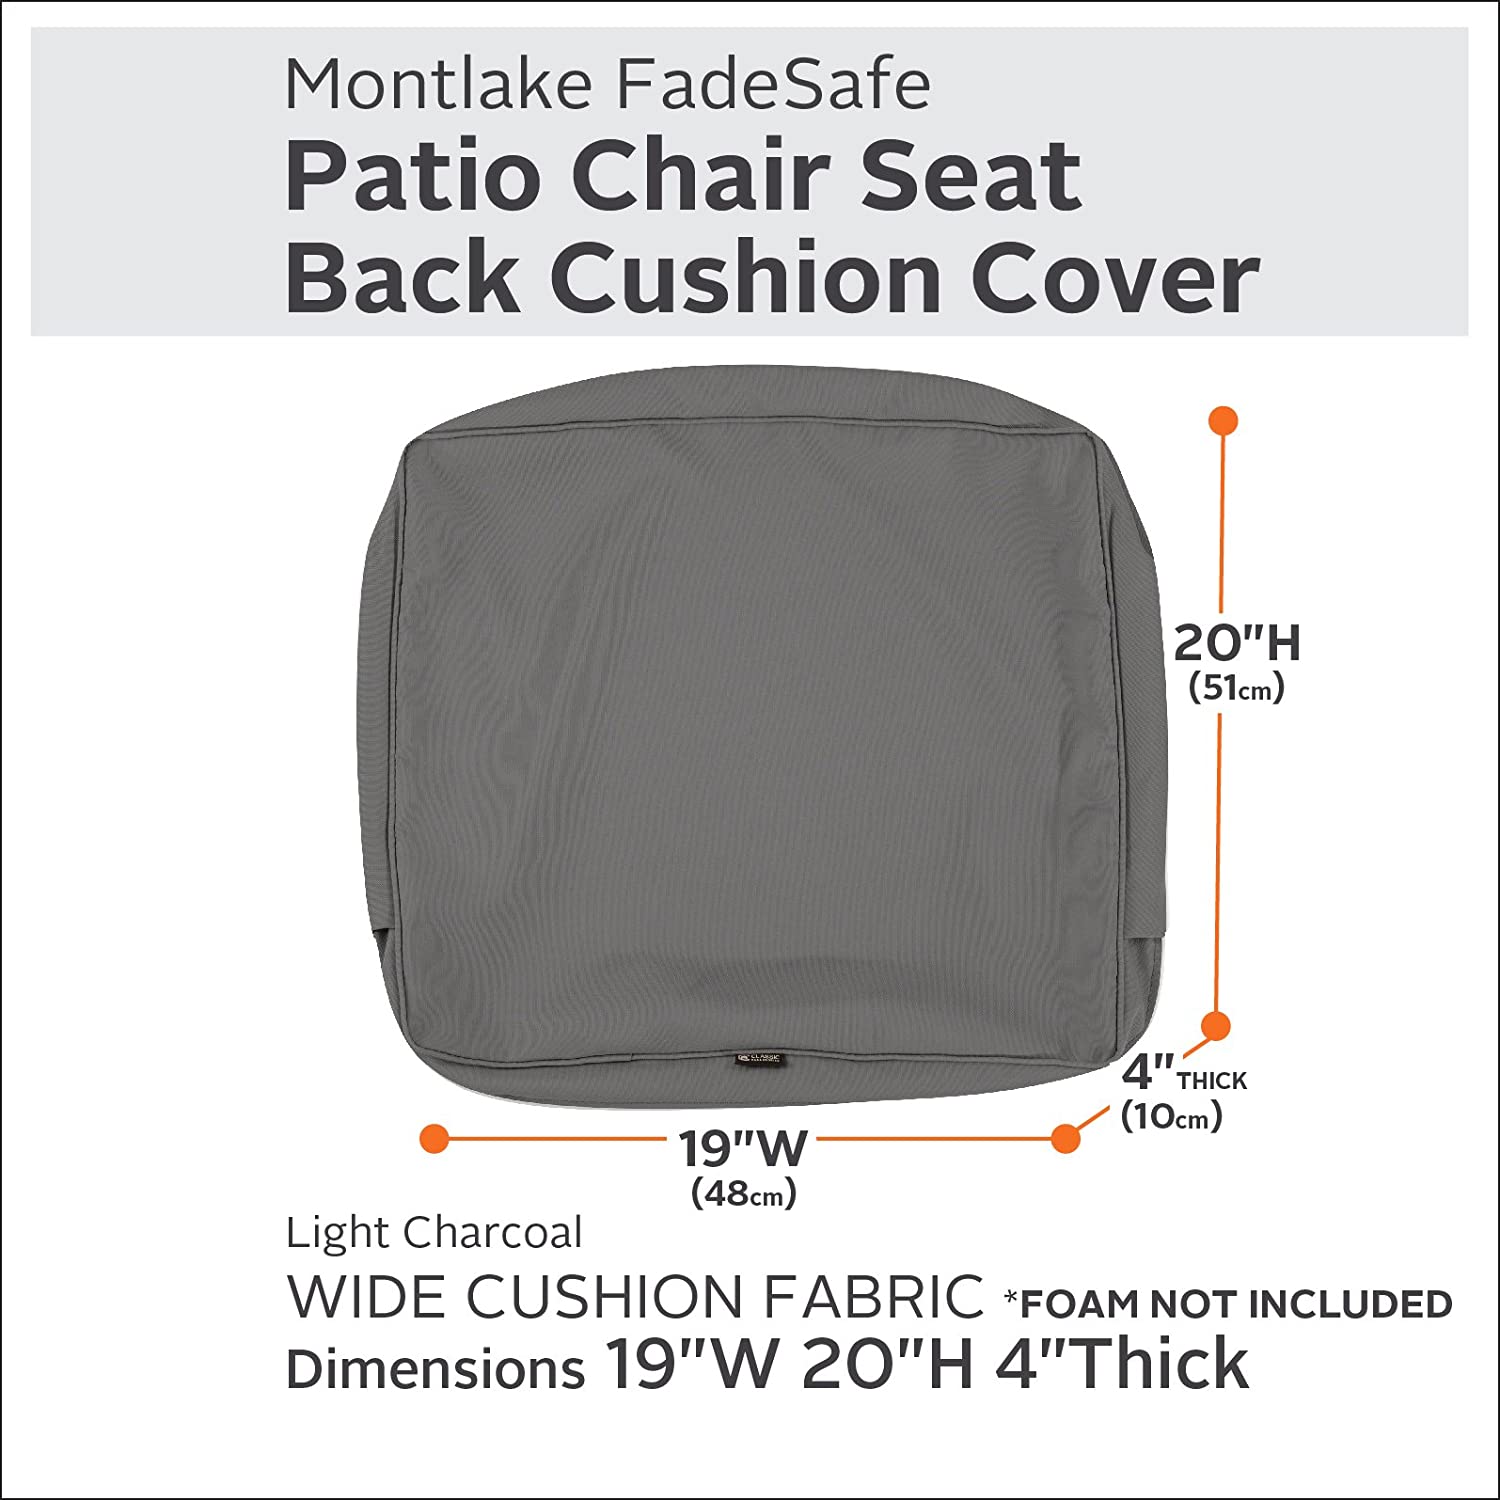 Classic Accessories Montlake Water-Resistant 19 x 20 x 4 Inch Outdoor Back Cushion Slip Cover, Patio Furniture Cushion Cover, Light Charcoal Grey, Patio Furniture Cushion Covers